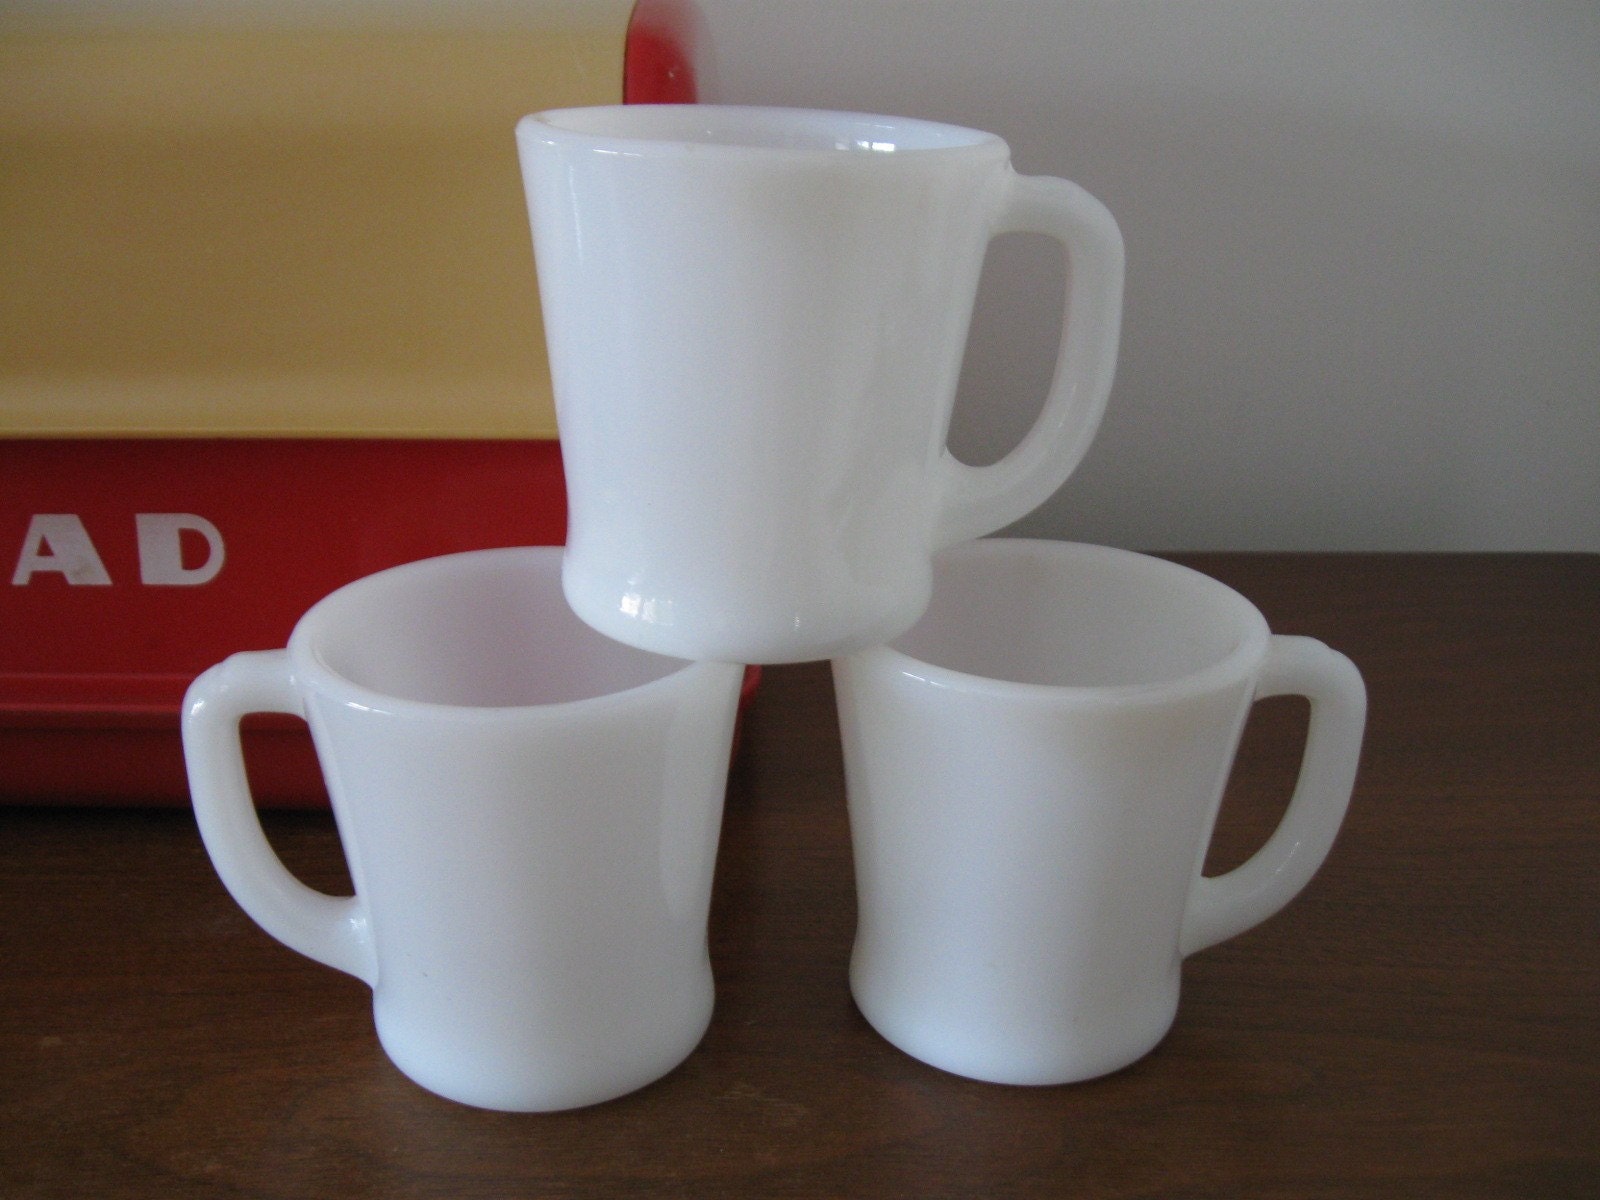 Vintage White Fire-King Coffee Mug Cups 1950s Set of by Petuniapie